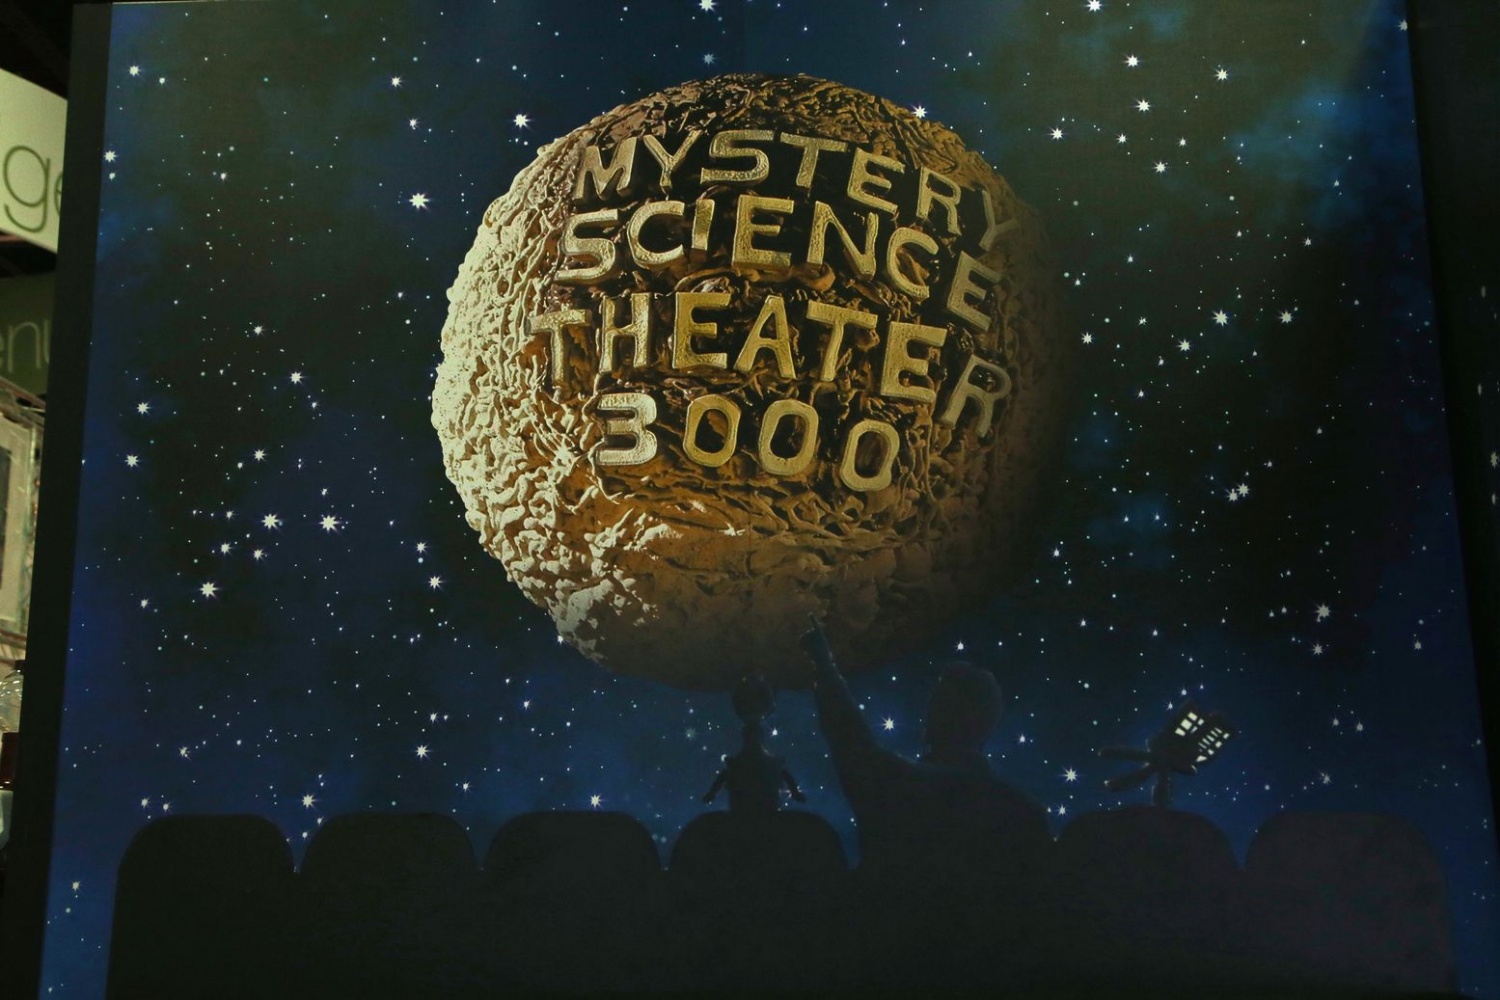 A display from the television series "Mystery Science Theater 3000" is shown at the Licensing Expo 2016 at the Mandalay Bay Convention Center on June 21, 2016 in Las Vegas, Nevada. (Photo by Gabe Ginsberg/Getty Images)